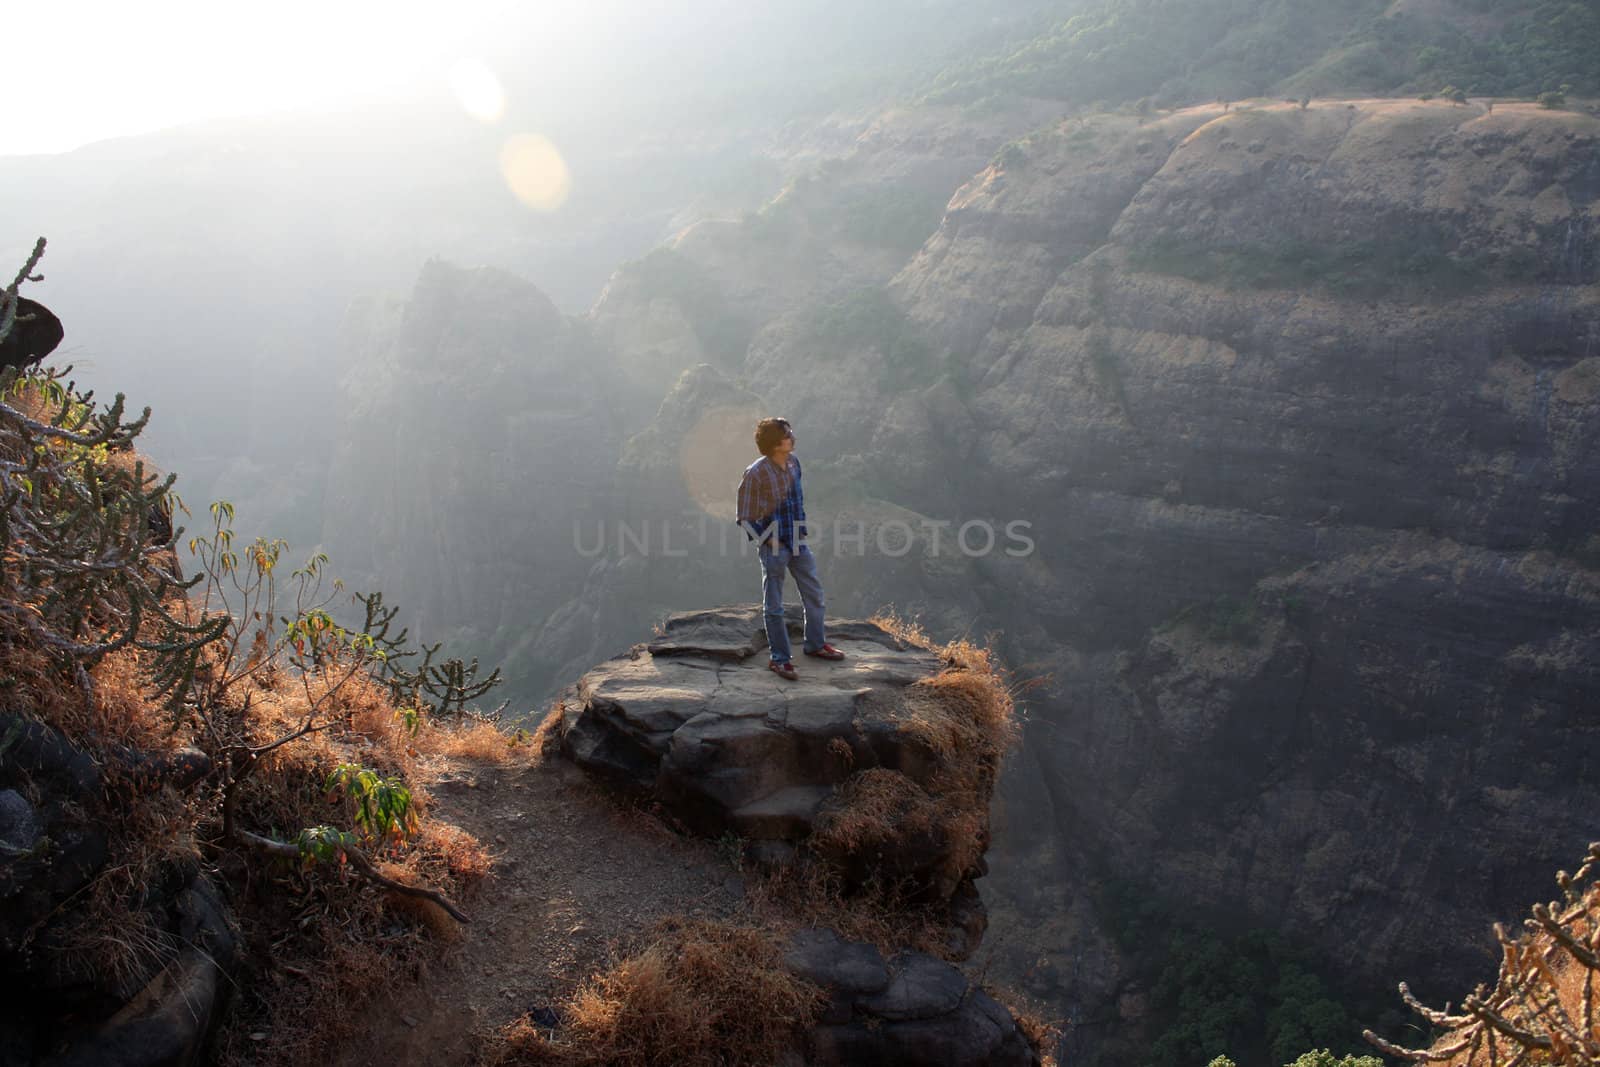 A young Indian guy contemplating on a rock near a valley.